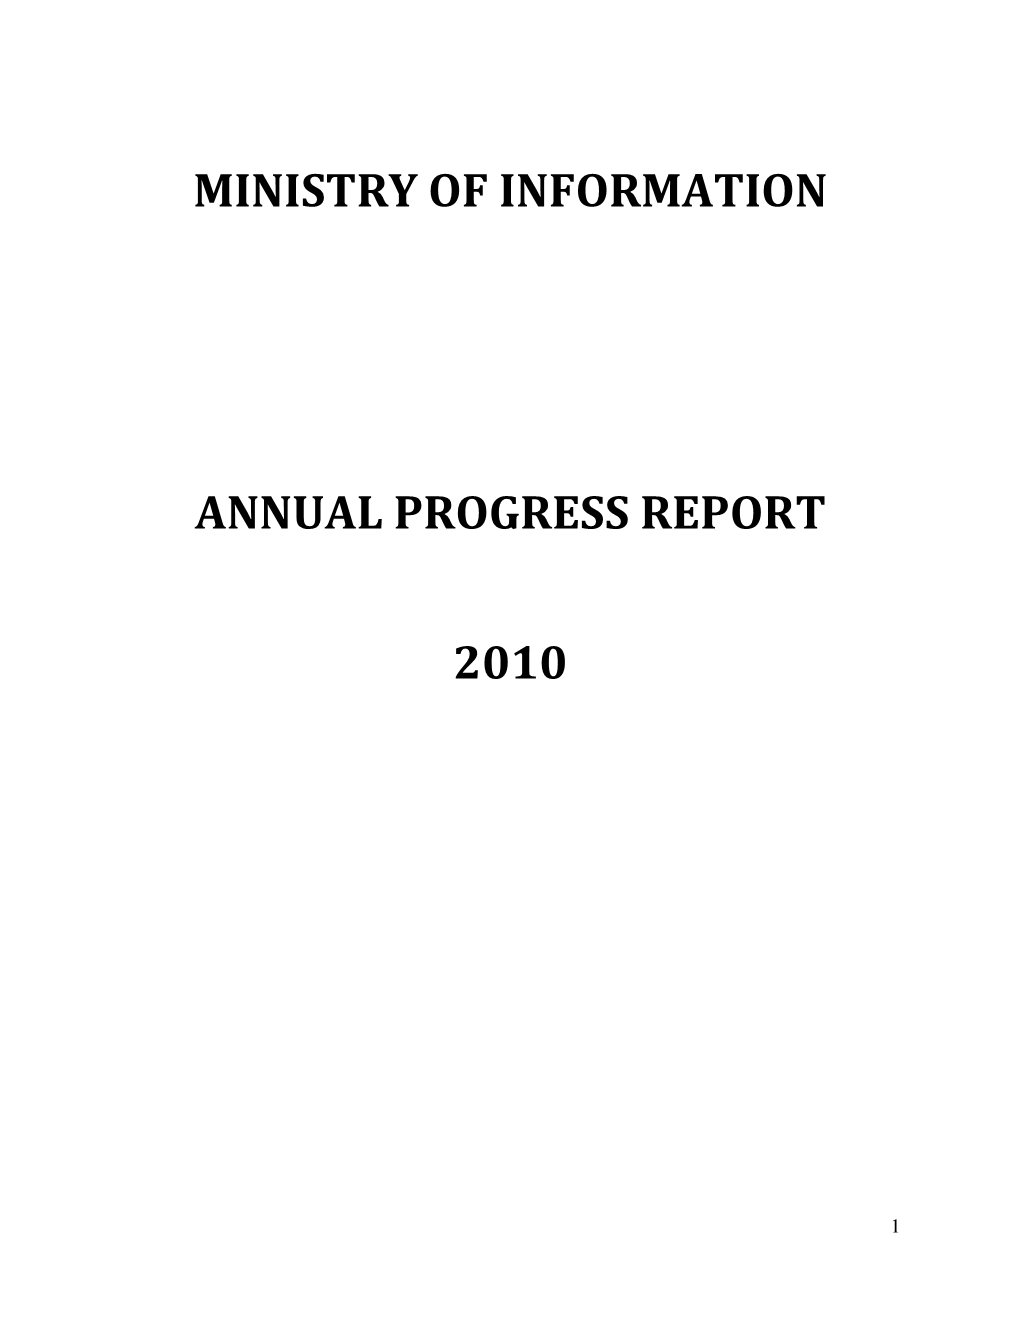 Ministry of Information Annual Progress Report 2010